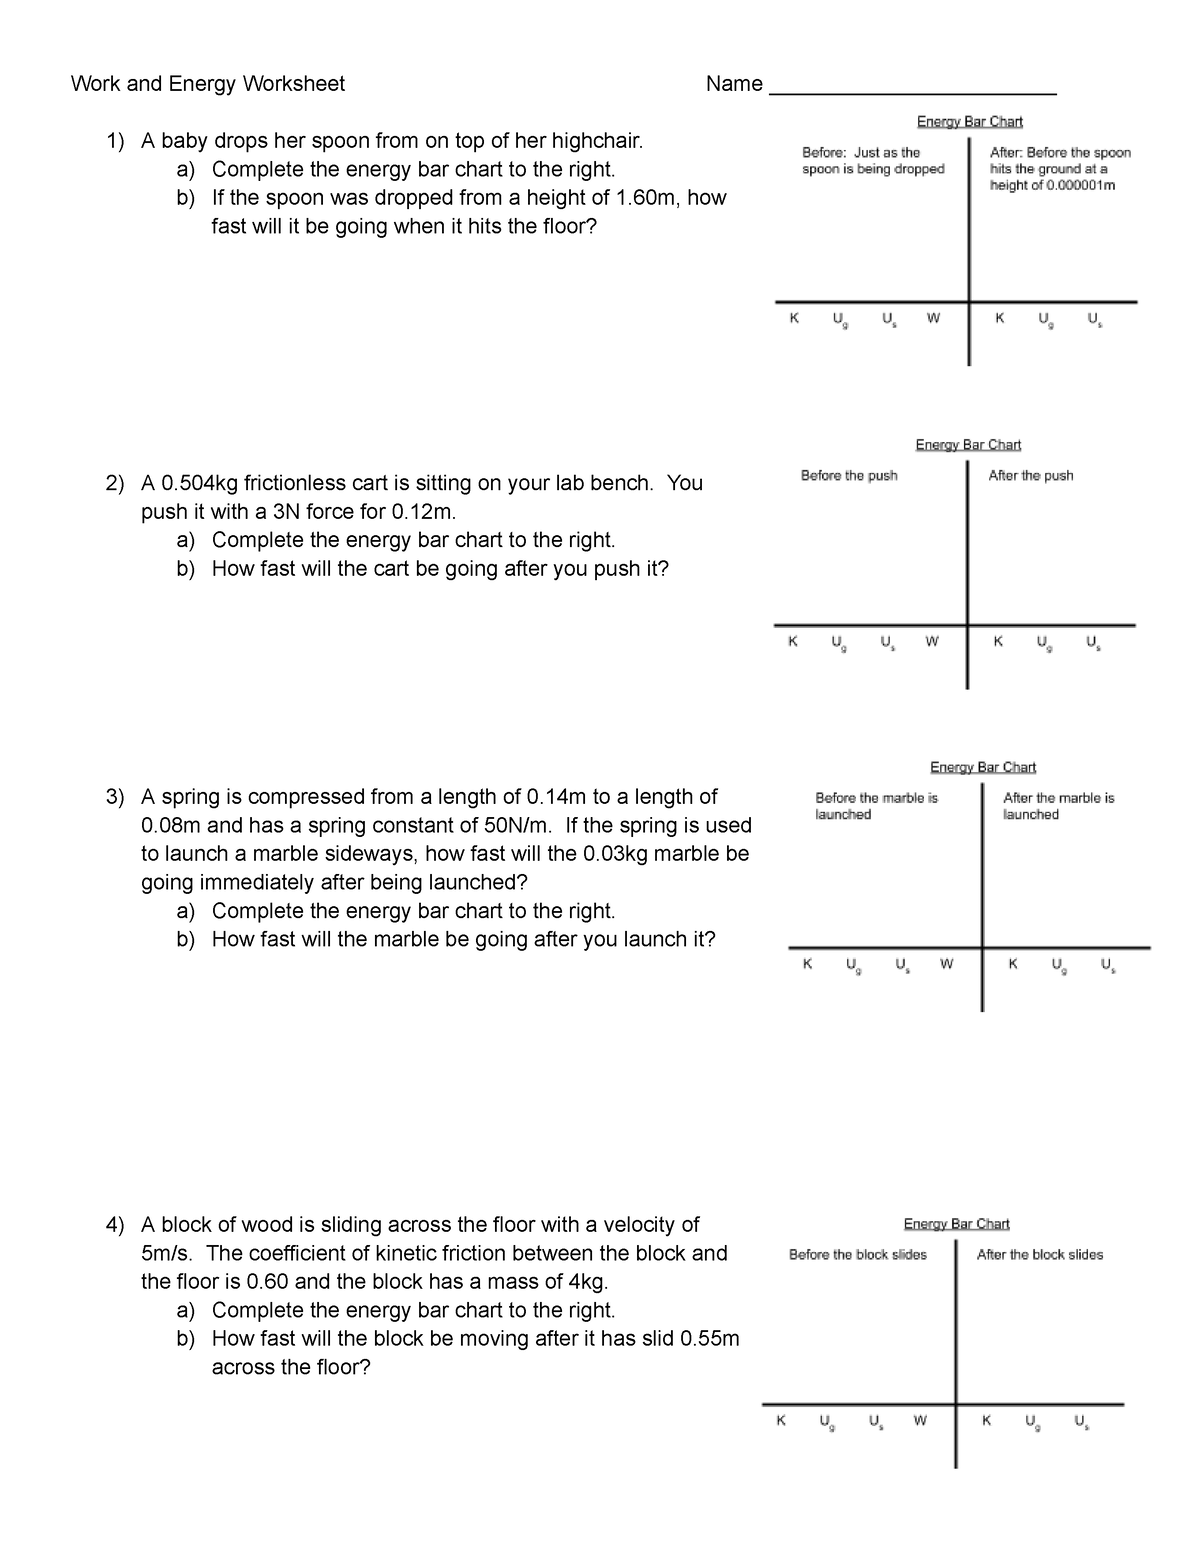 2 Work and Energy Worksheet a) Complete the energy bar chart to the